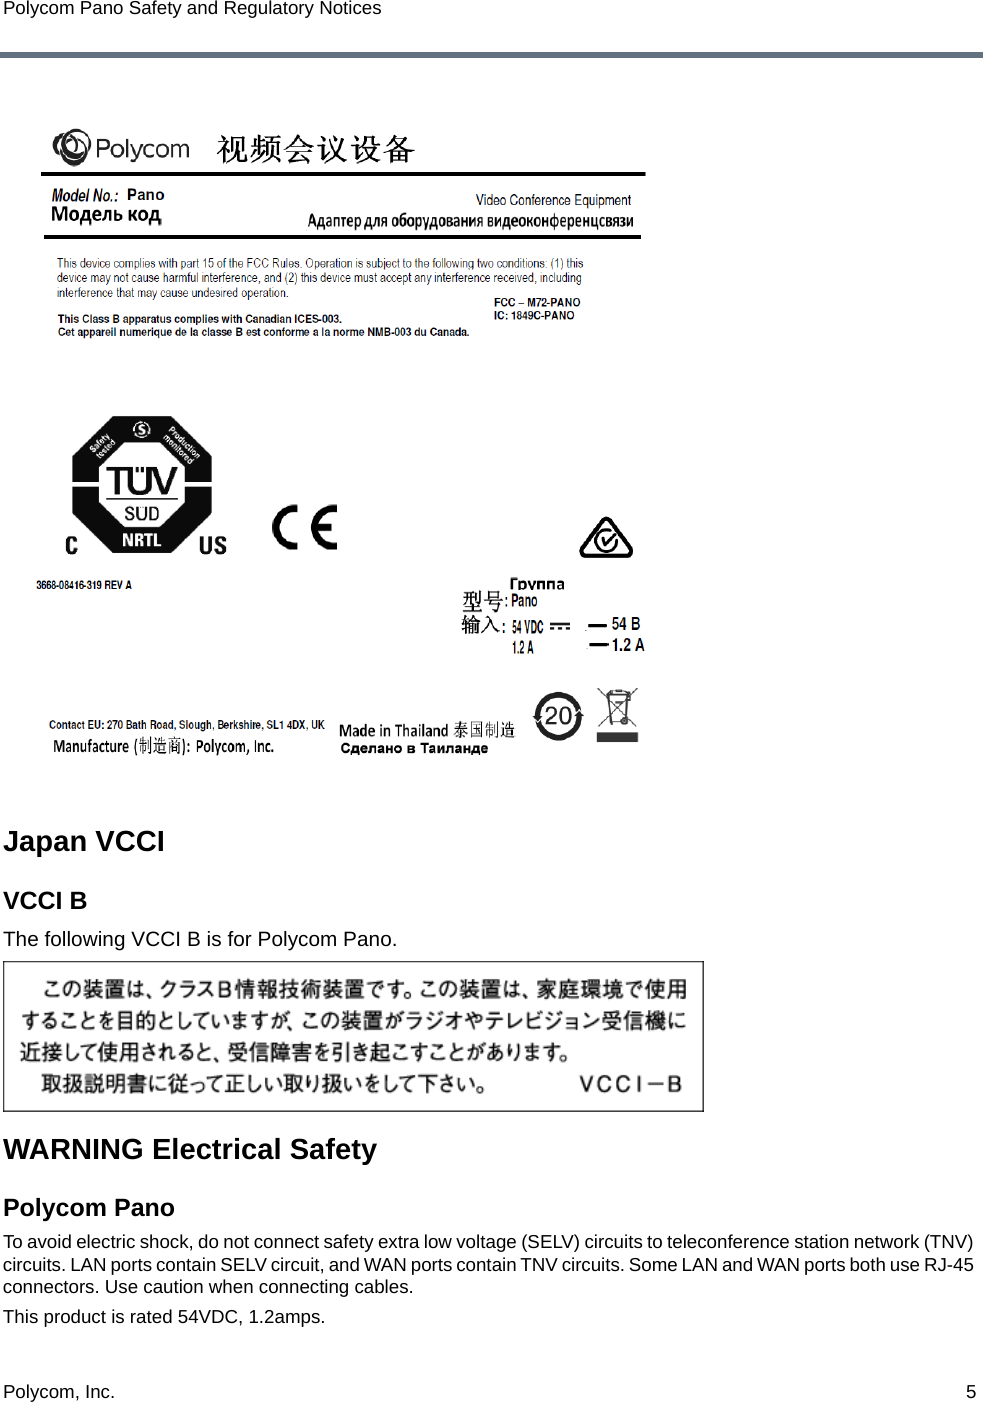 Polycom, Inc.  5Polycom Pano Safety and Regulatory NoticesJapan VCCIVCCI BThe following VCCI B is for Polycom Pano.WARNING Electrical SafetyPolycom Pano To avoid electric shock, do not connect safety extra low voltage (SELV) circuits to teleconference station network (TNV) circuits. LAN ports contain SELV circuit, and WAN ports contain TNV circuits. Some LAN and WAN ports both use RJ-45 connectors. Use caution when connecting cables.This product is rated 54VDC, 1.2amps. 